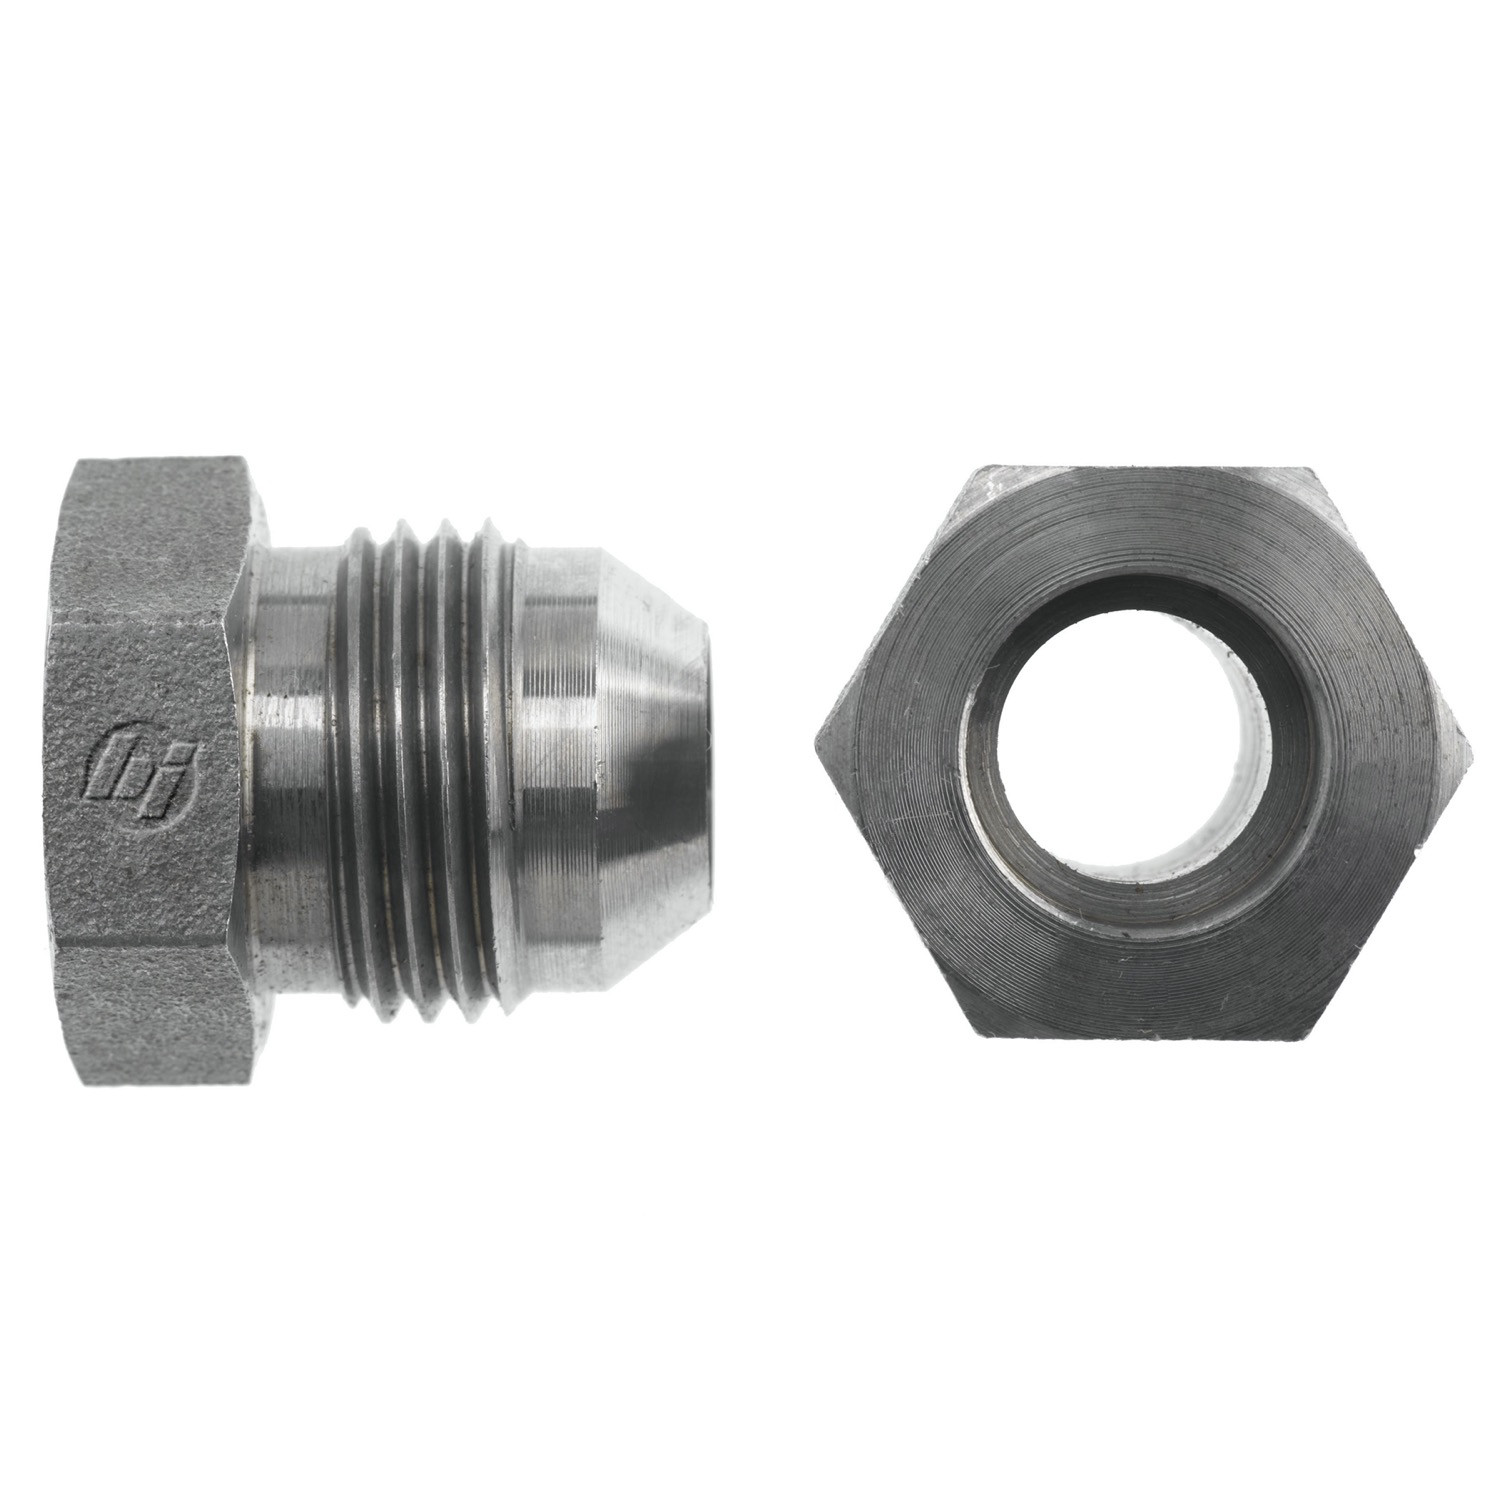 Hydraulic Hose Adapters - Bore Straight Fitting, 0403 Series